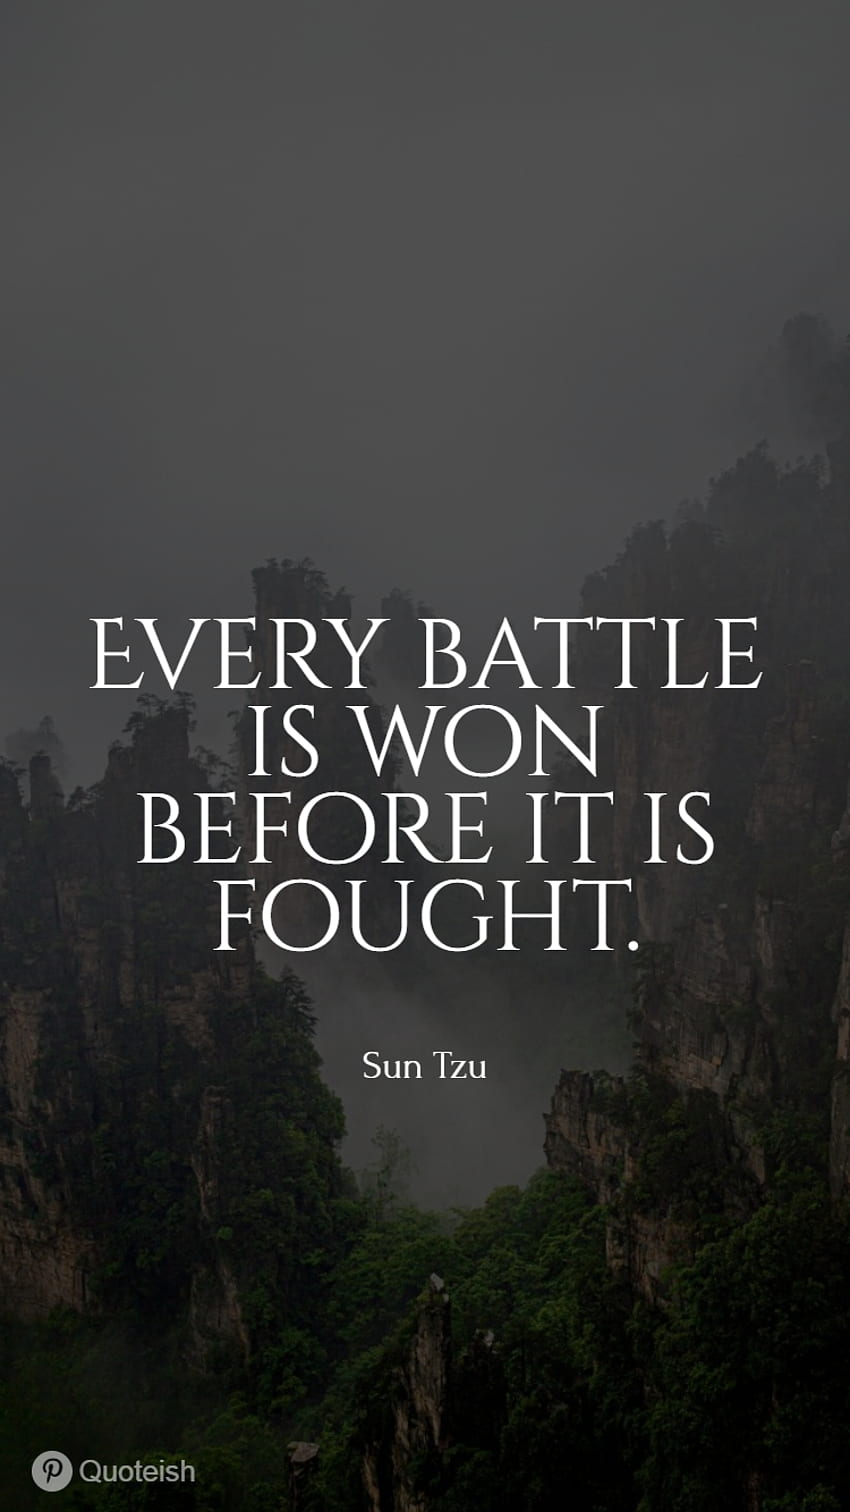 Battle Quotes & Sayings. Battle quotes, Strategy quotes, War quotes, Sun Tzu HD phone wallpaper